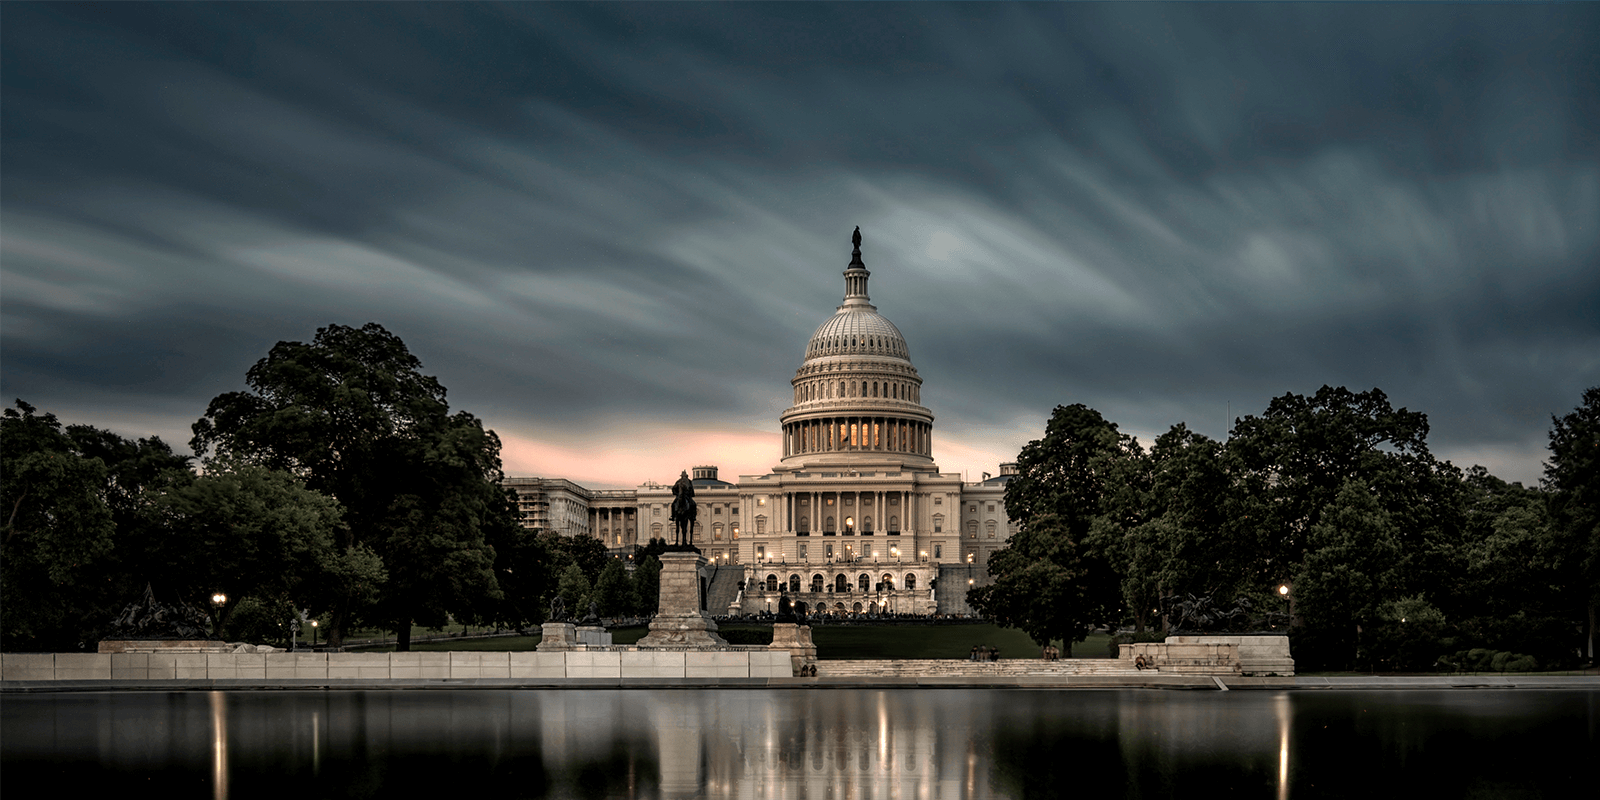 The United States Capitol Building at dusk.